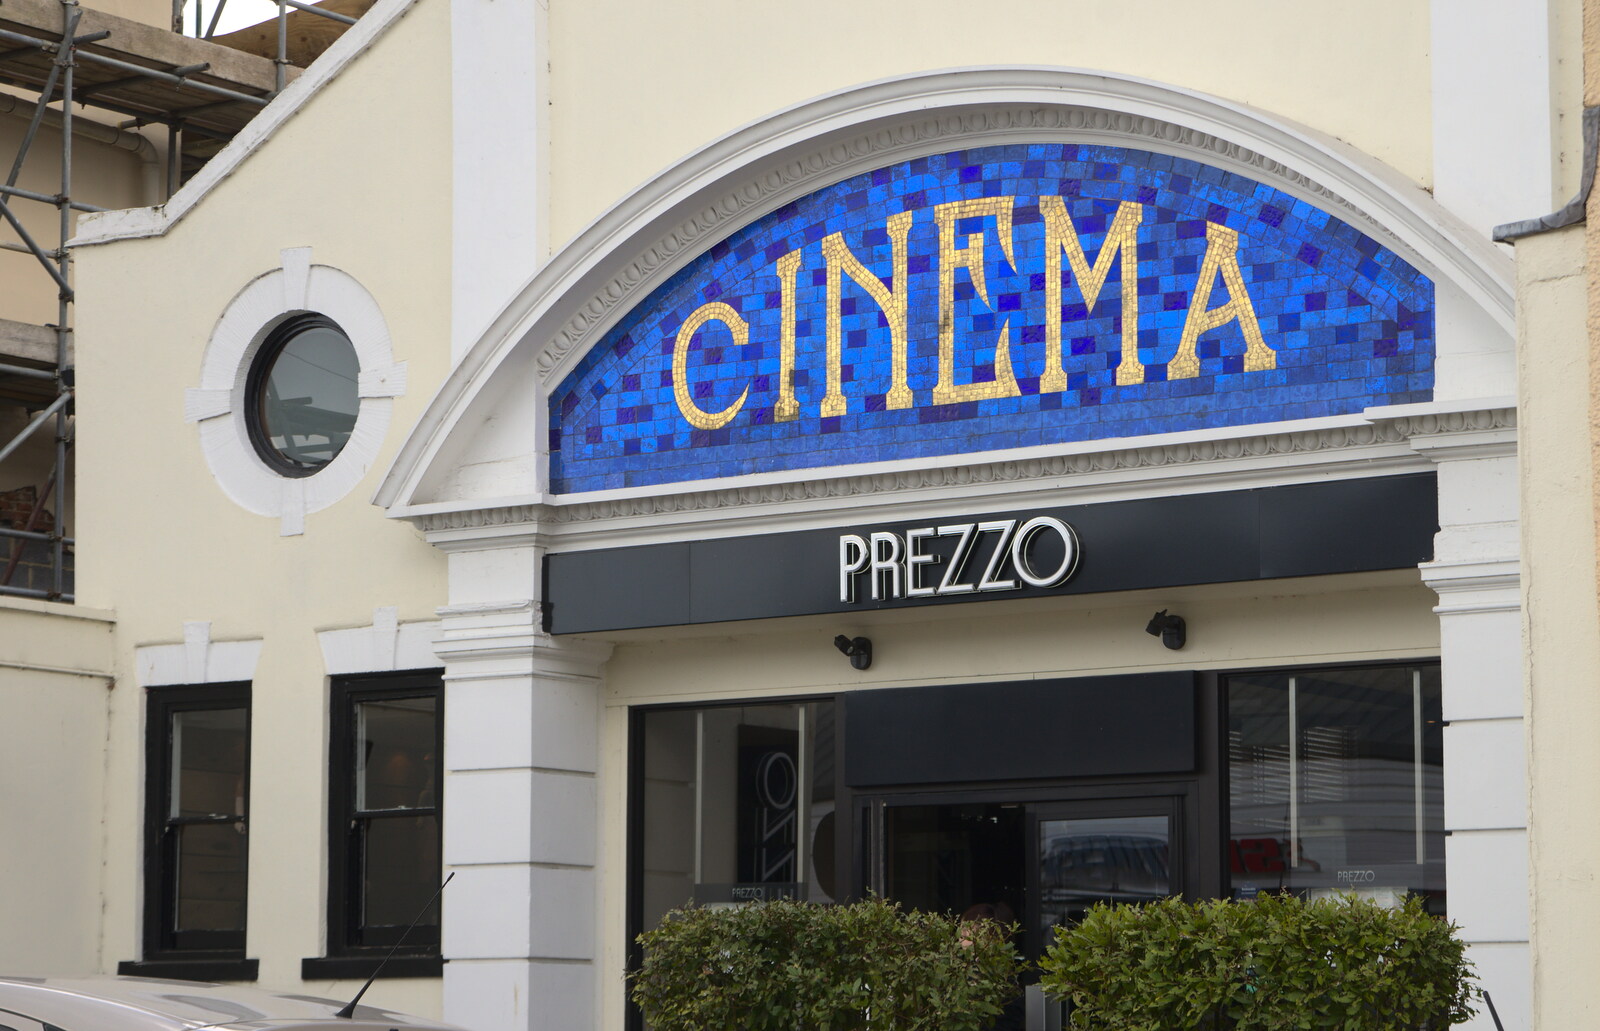 Prezzo in an old cinema from A Postcard from Beccles, Suffolk - 2nd April 2017